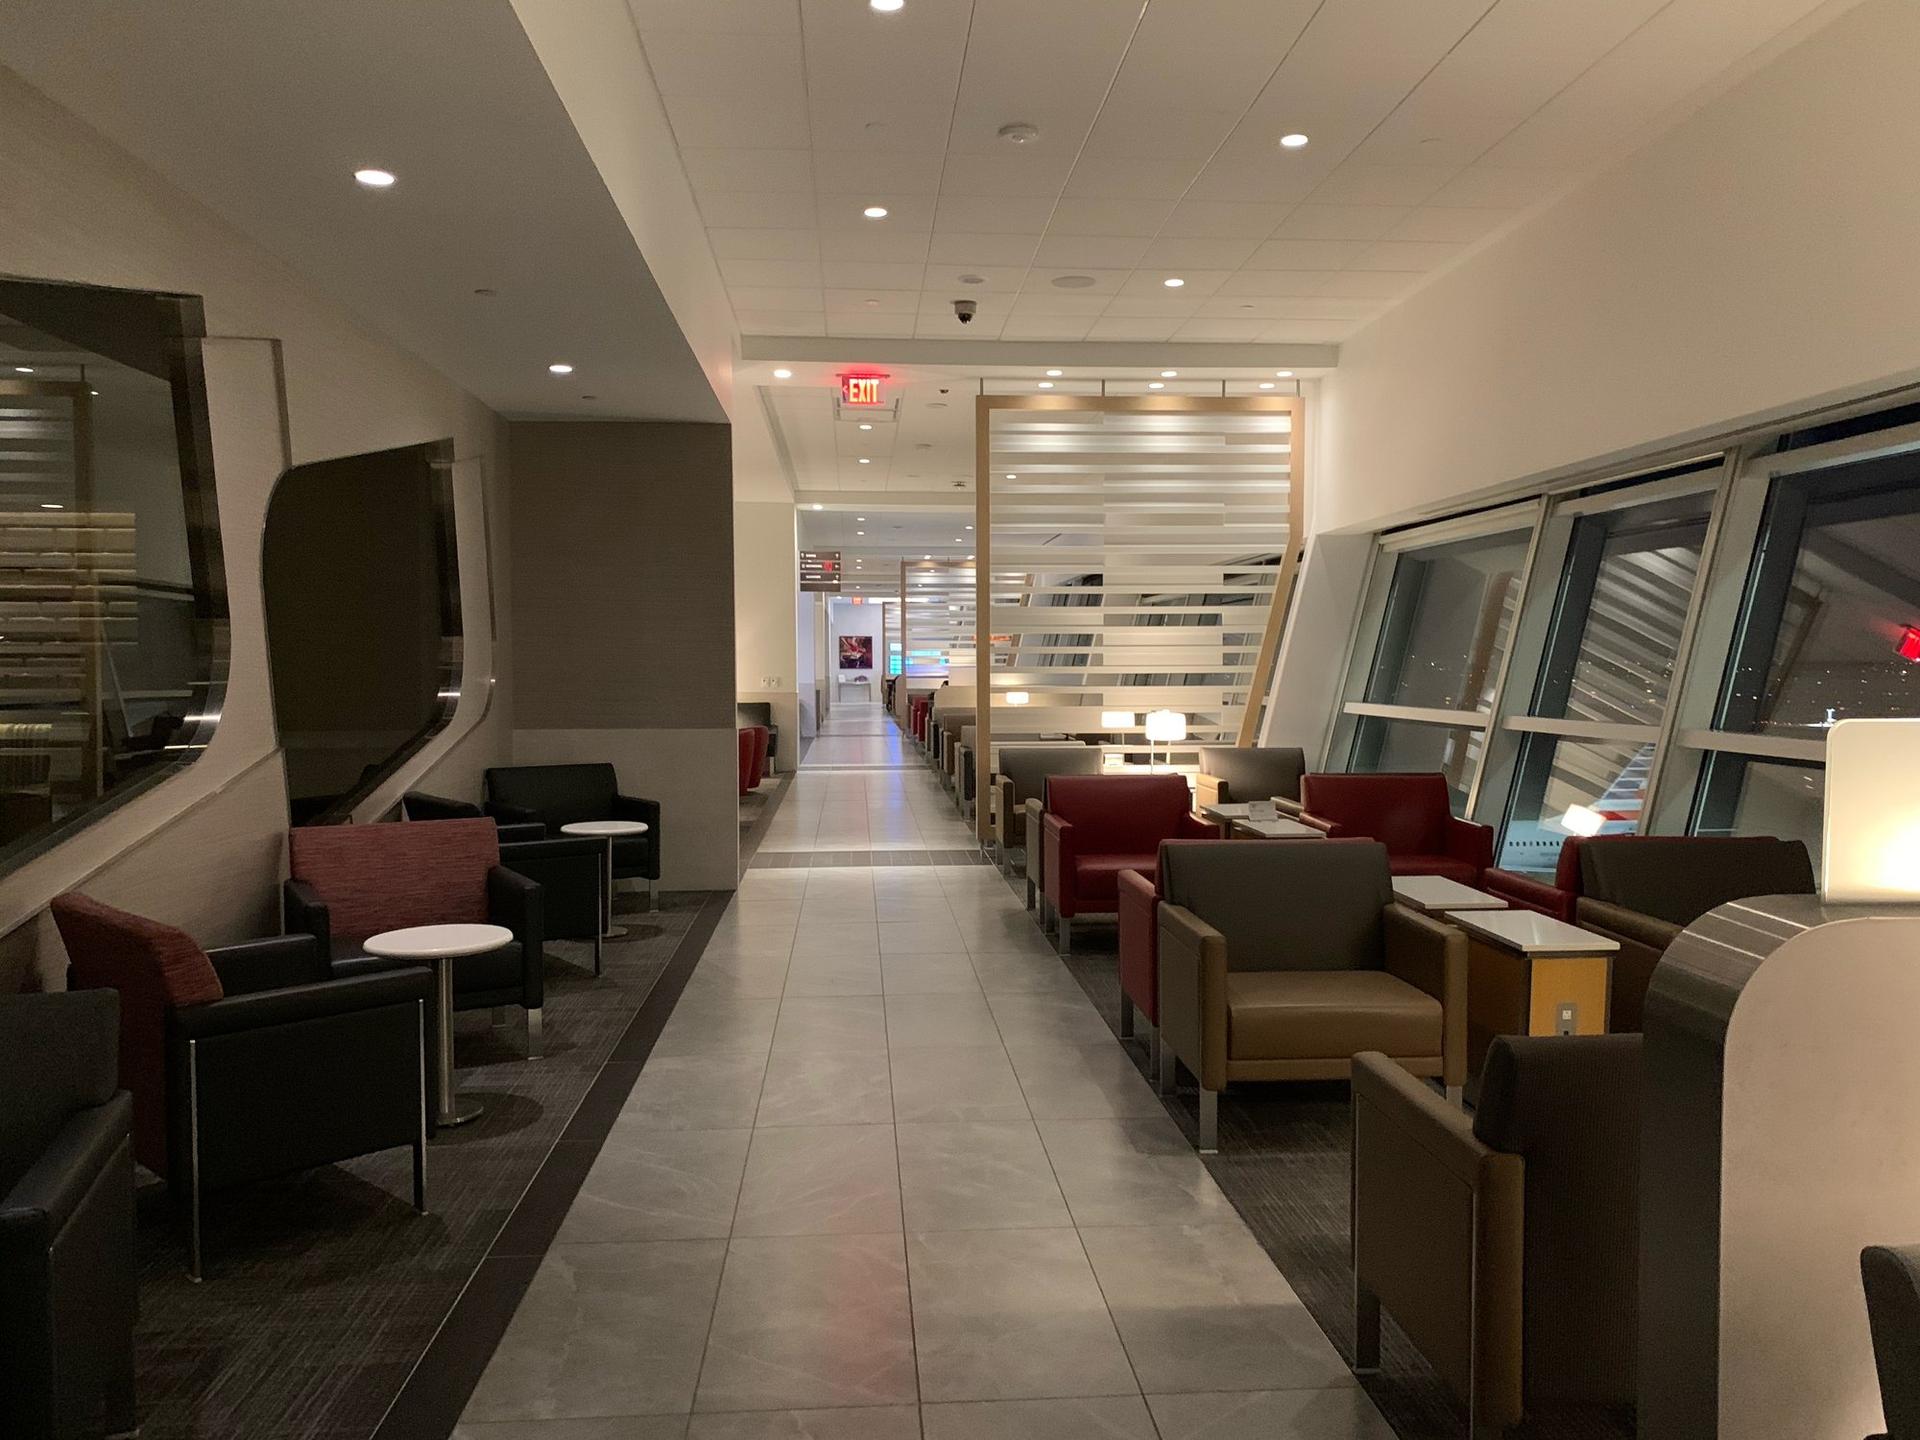 American Airlines Flagship Lounge image 15 of 55